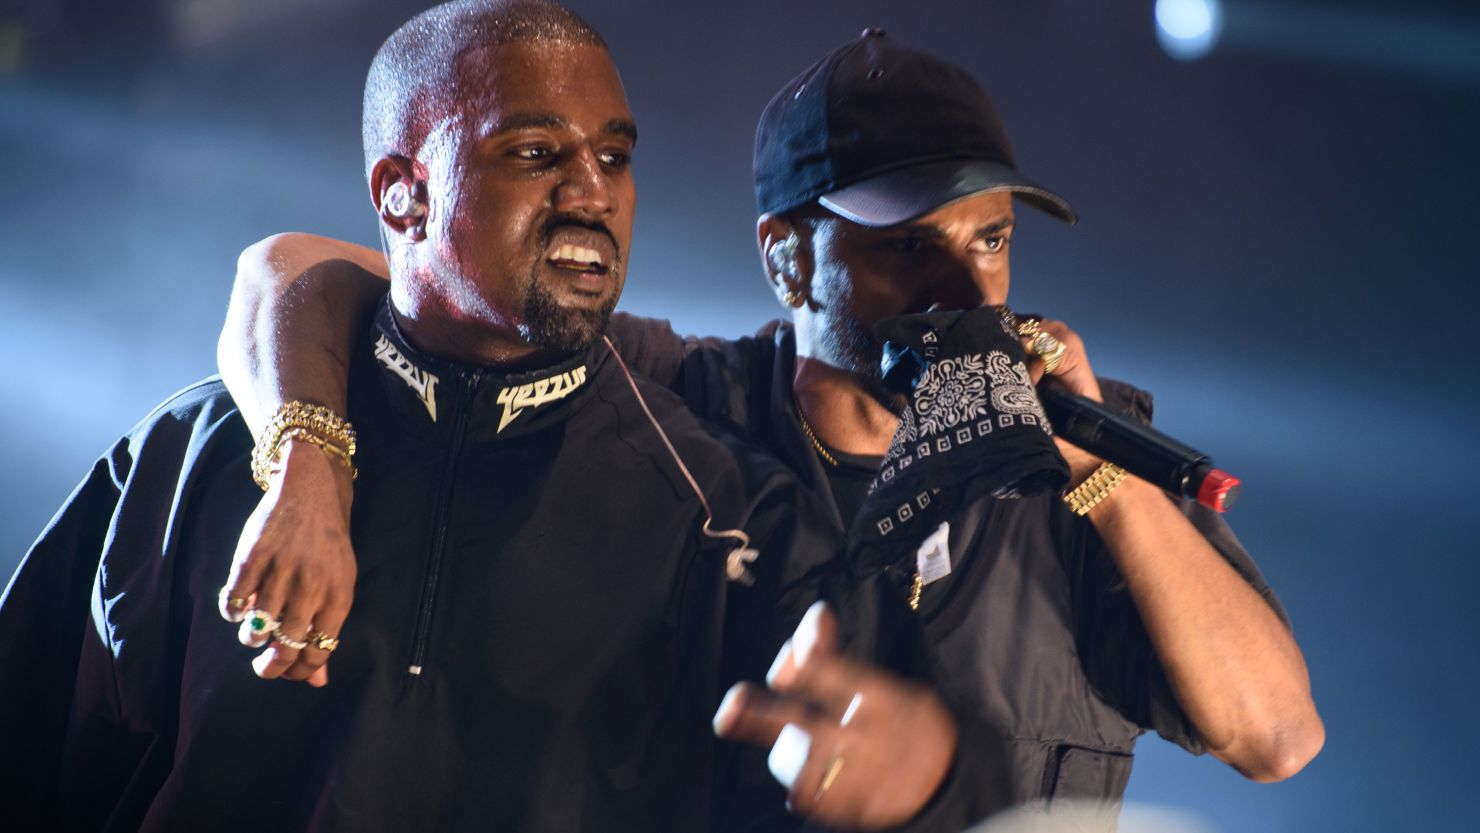 Kanye West and Big Sean team up Sunday for the 2016 Hot 97 Summer Jam in New Jersey.  A later show was canceled.